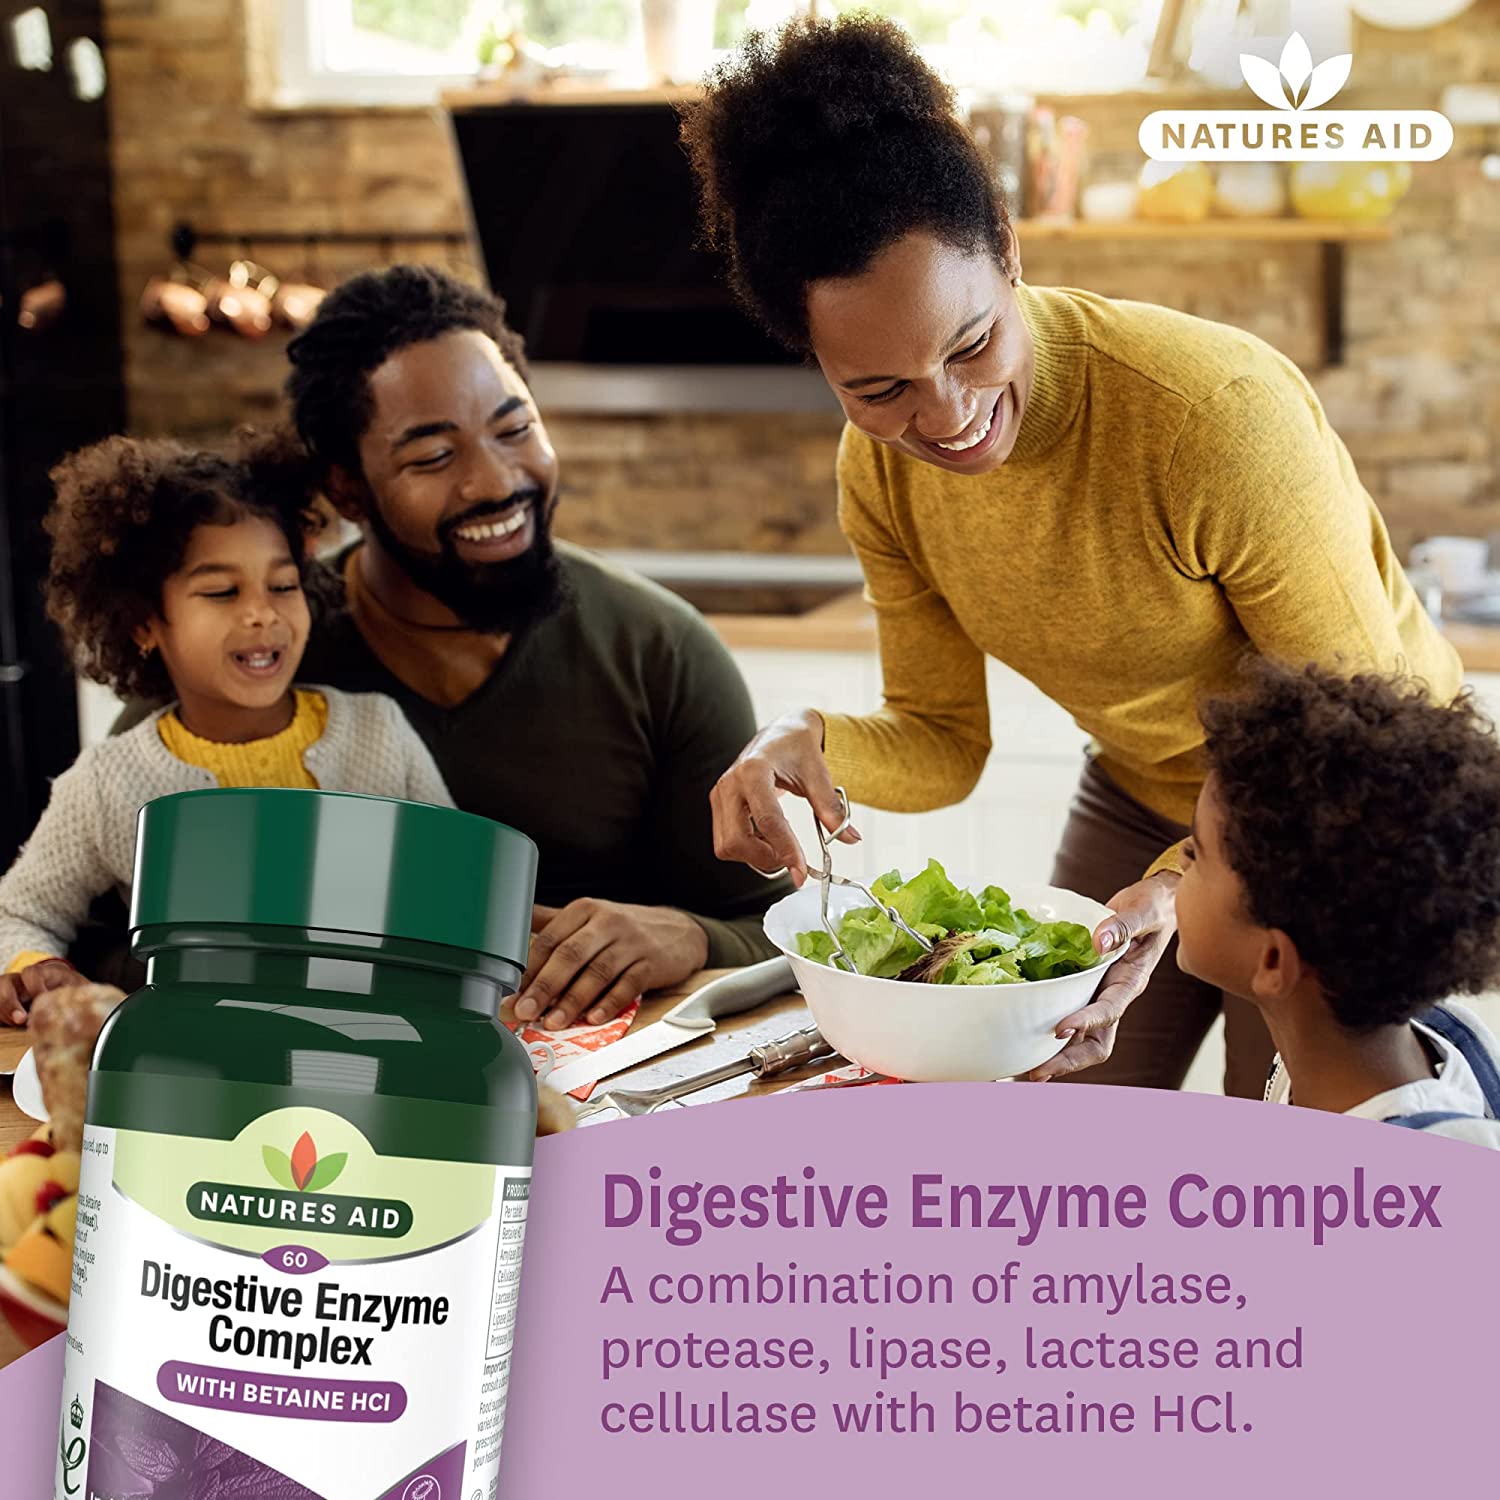 Digestive Enzyme Complex 60 Tablets